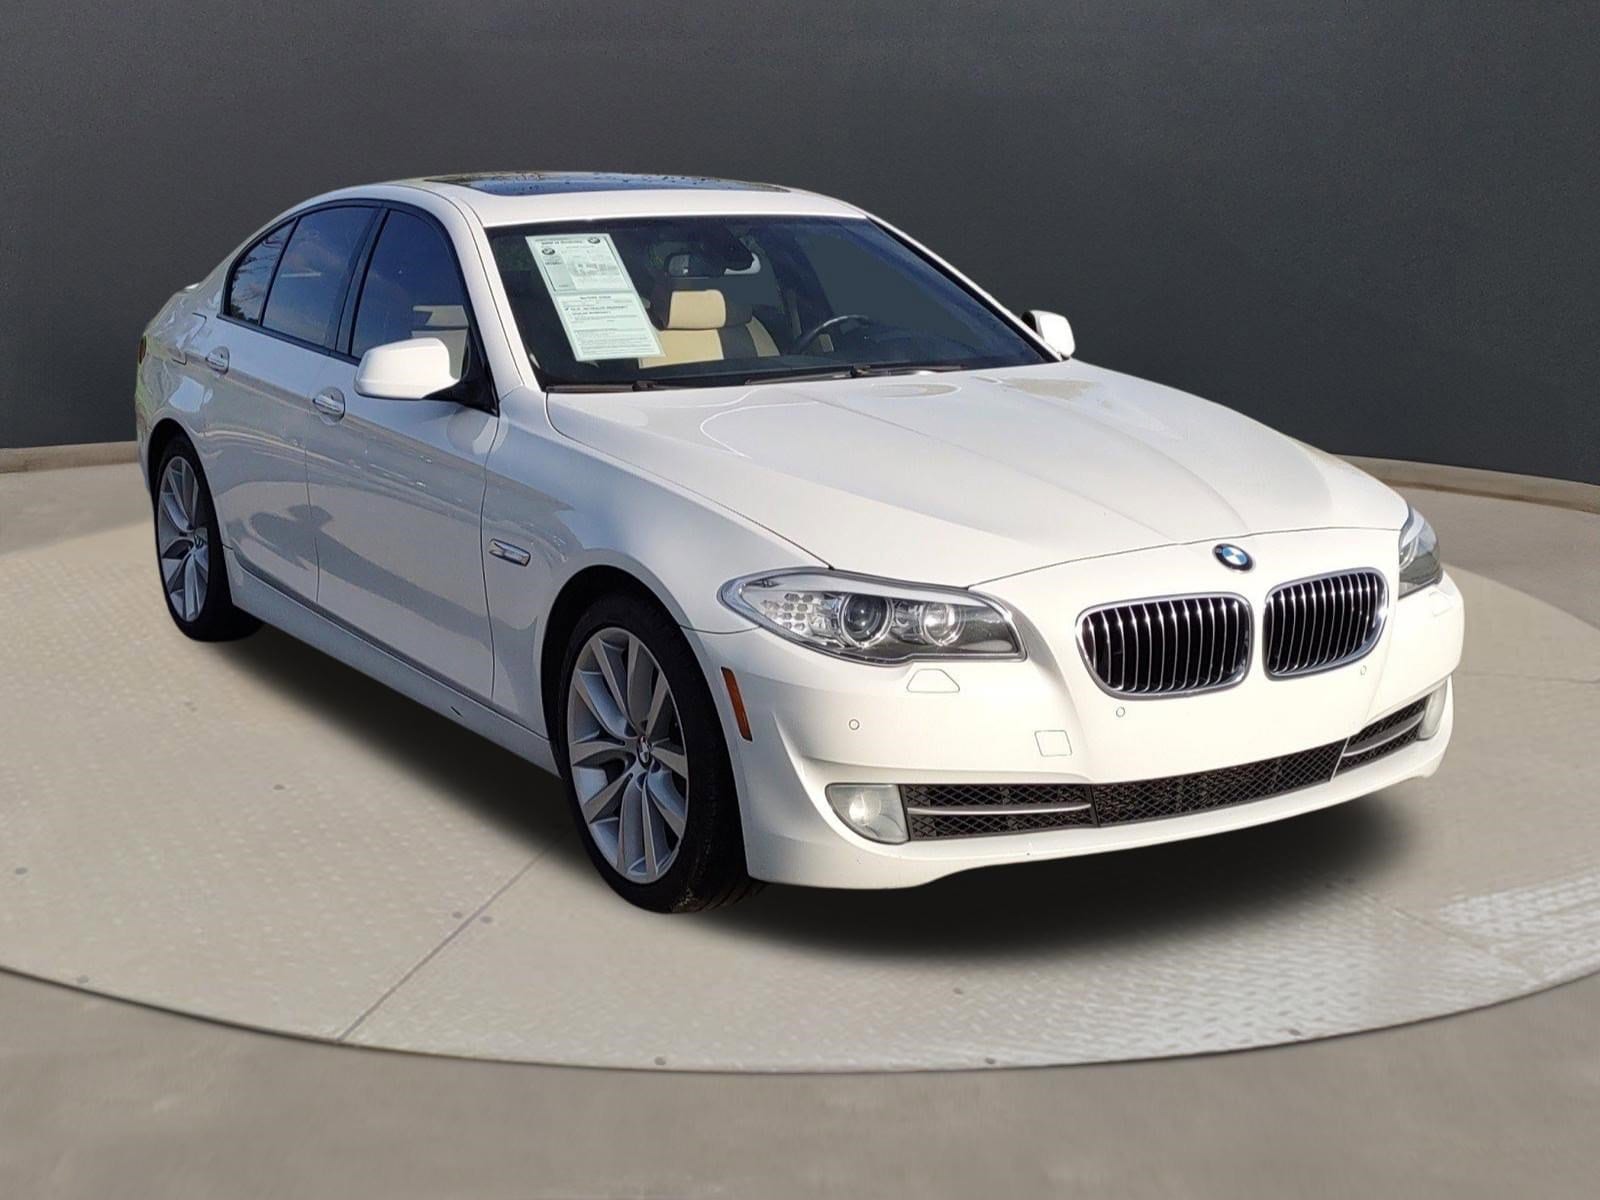 Used 2012 BMW 5 Series 535i with VIN WBAFR7C51CC810558 for sale in Brentwood, TN